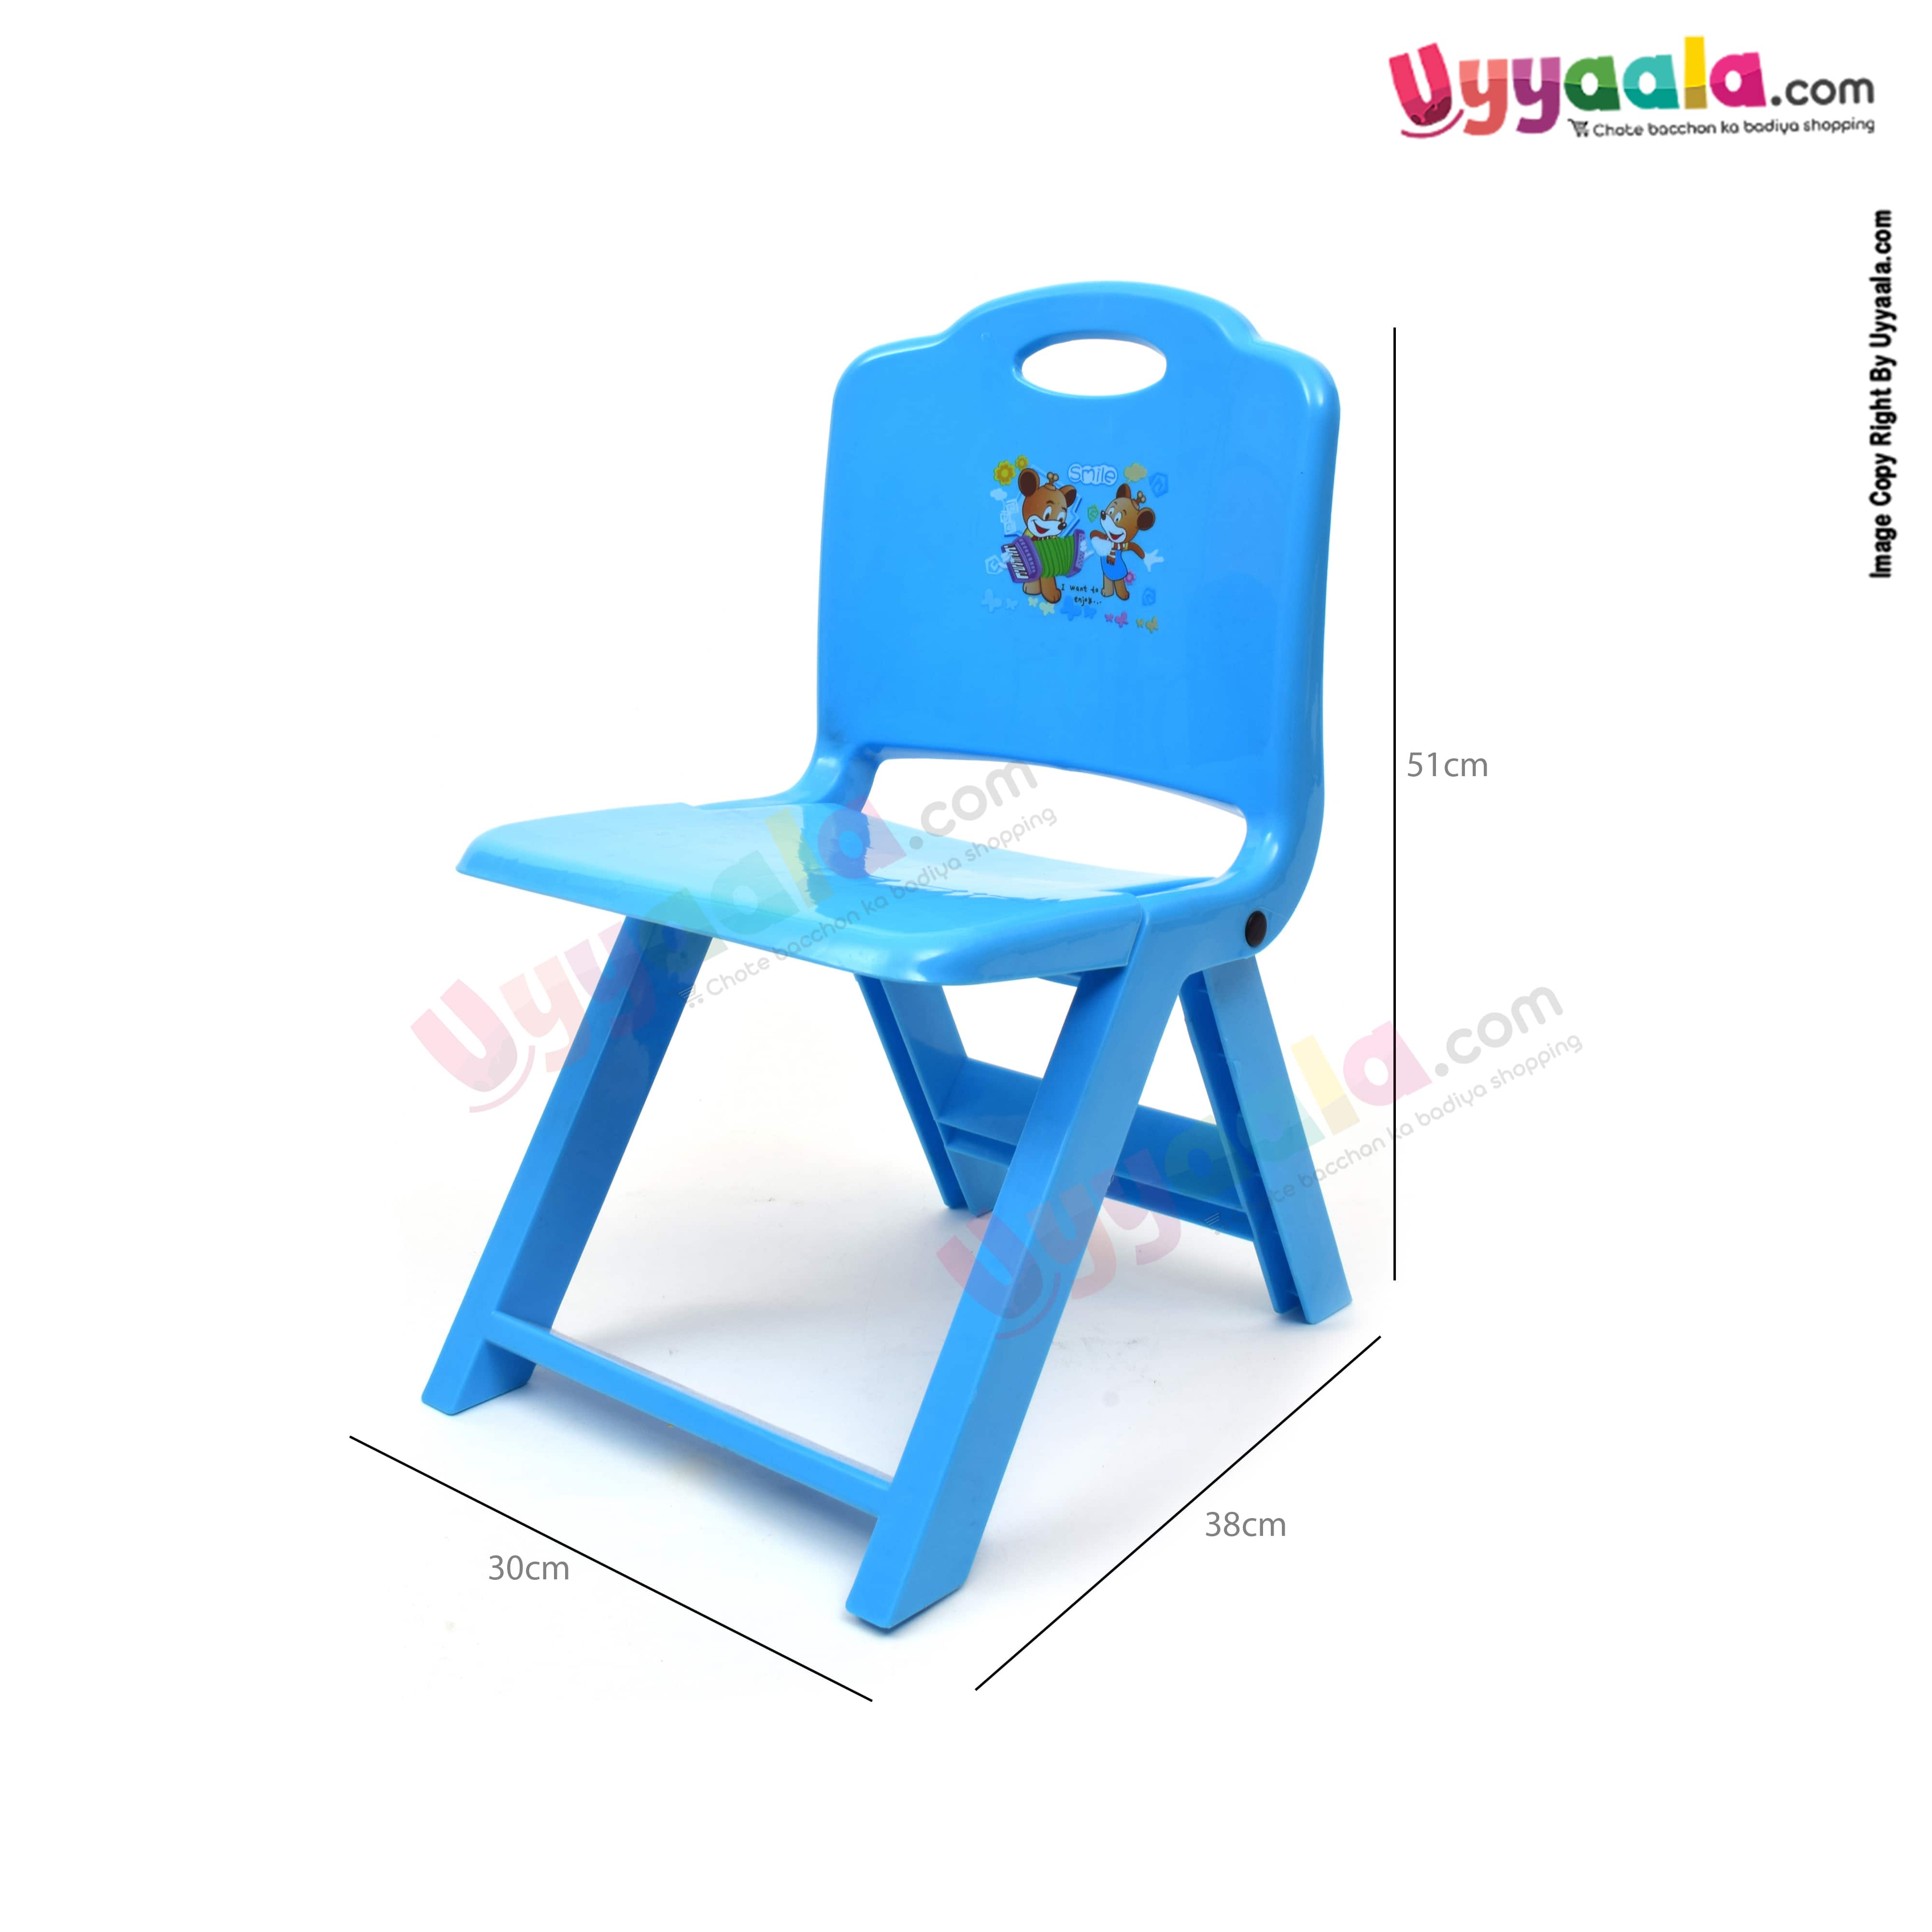 SMILE folding chair for kids micky mouse print - Blue